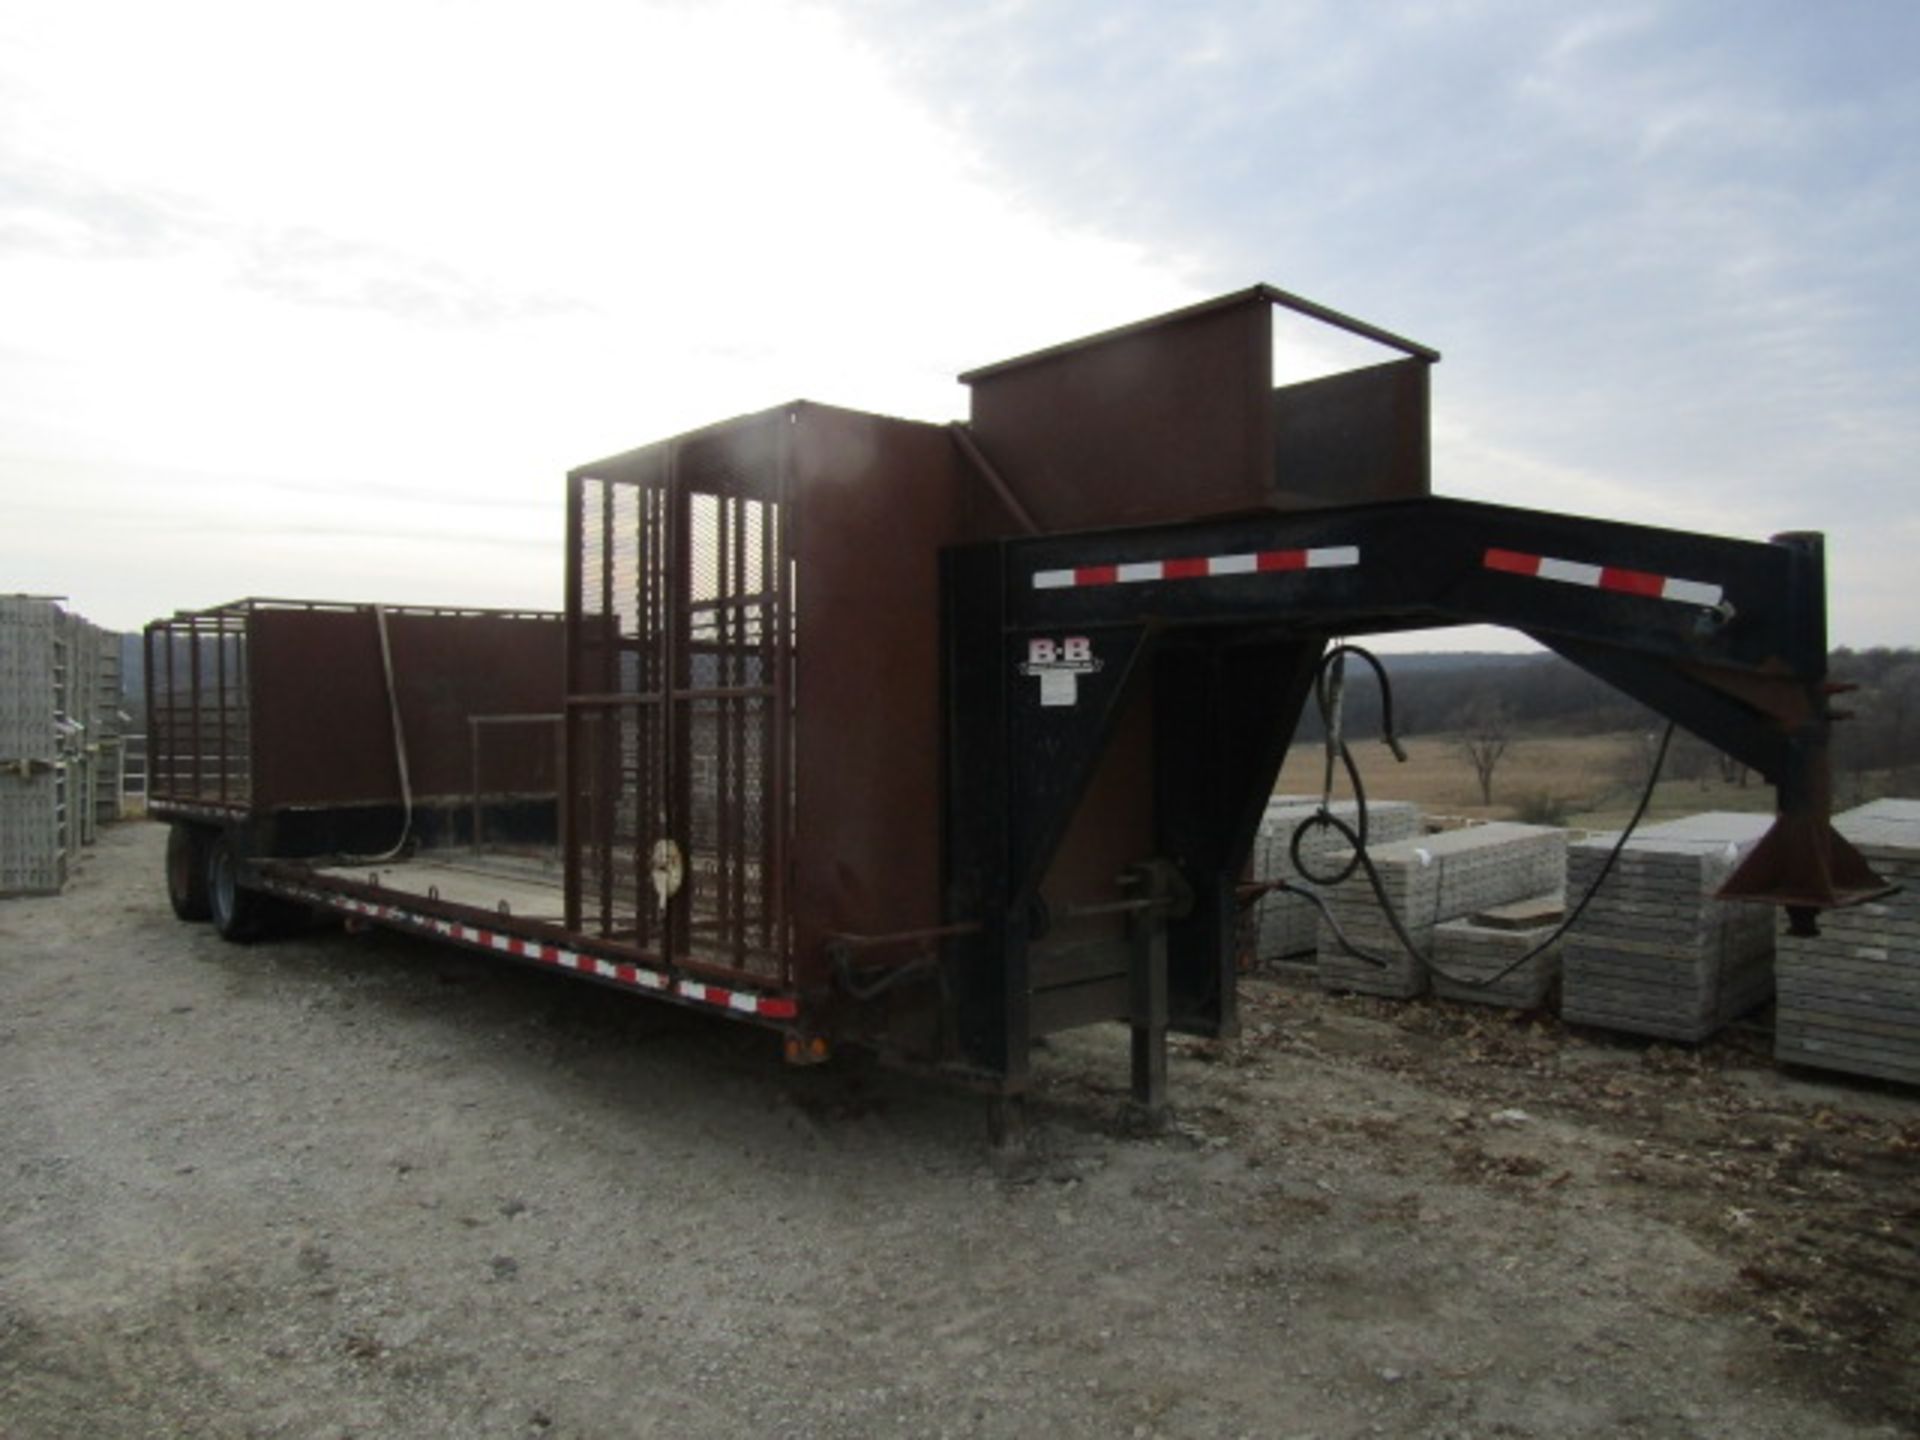 2004 B-B Gooseneck Trailer, Tandem Axle, 18' 8" x 9' 6" Well, 8' 7" Top Deck, Located in - Image 2 of 9